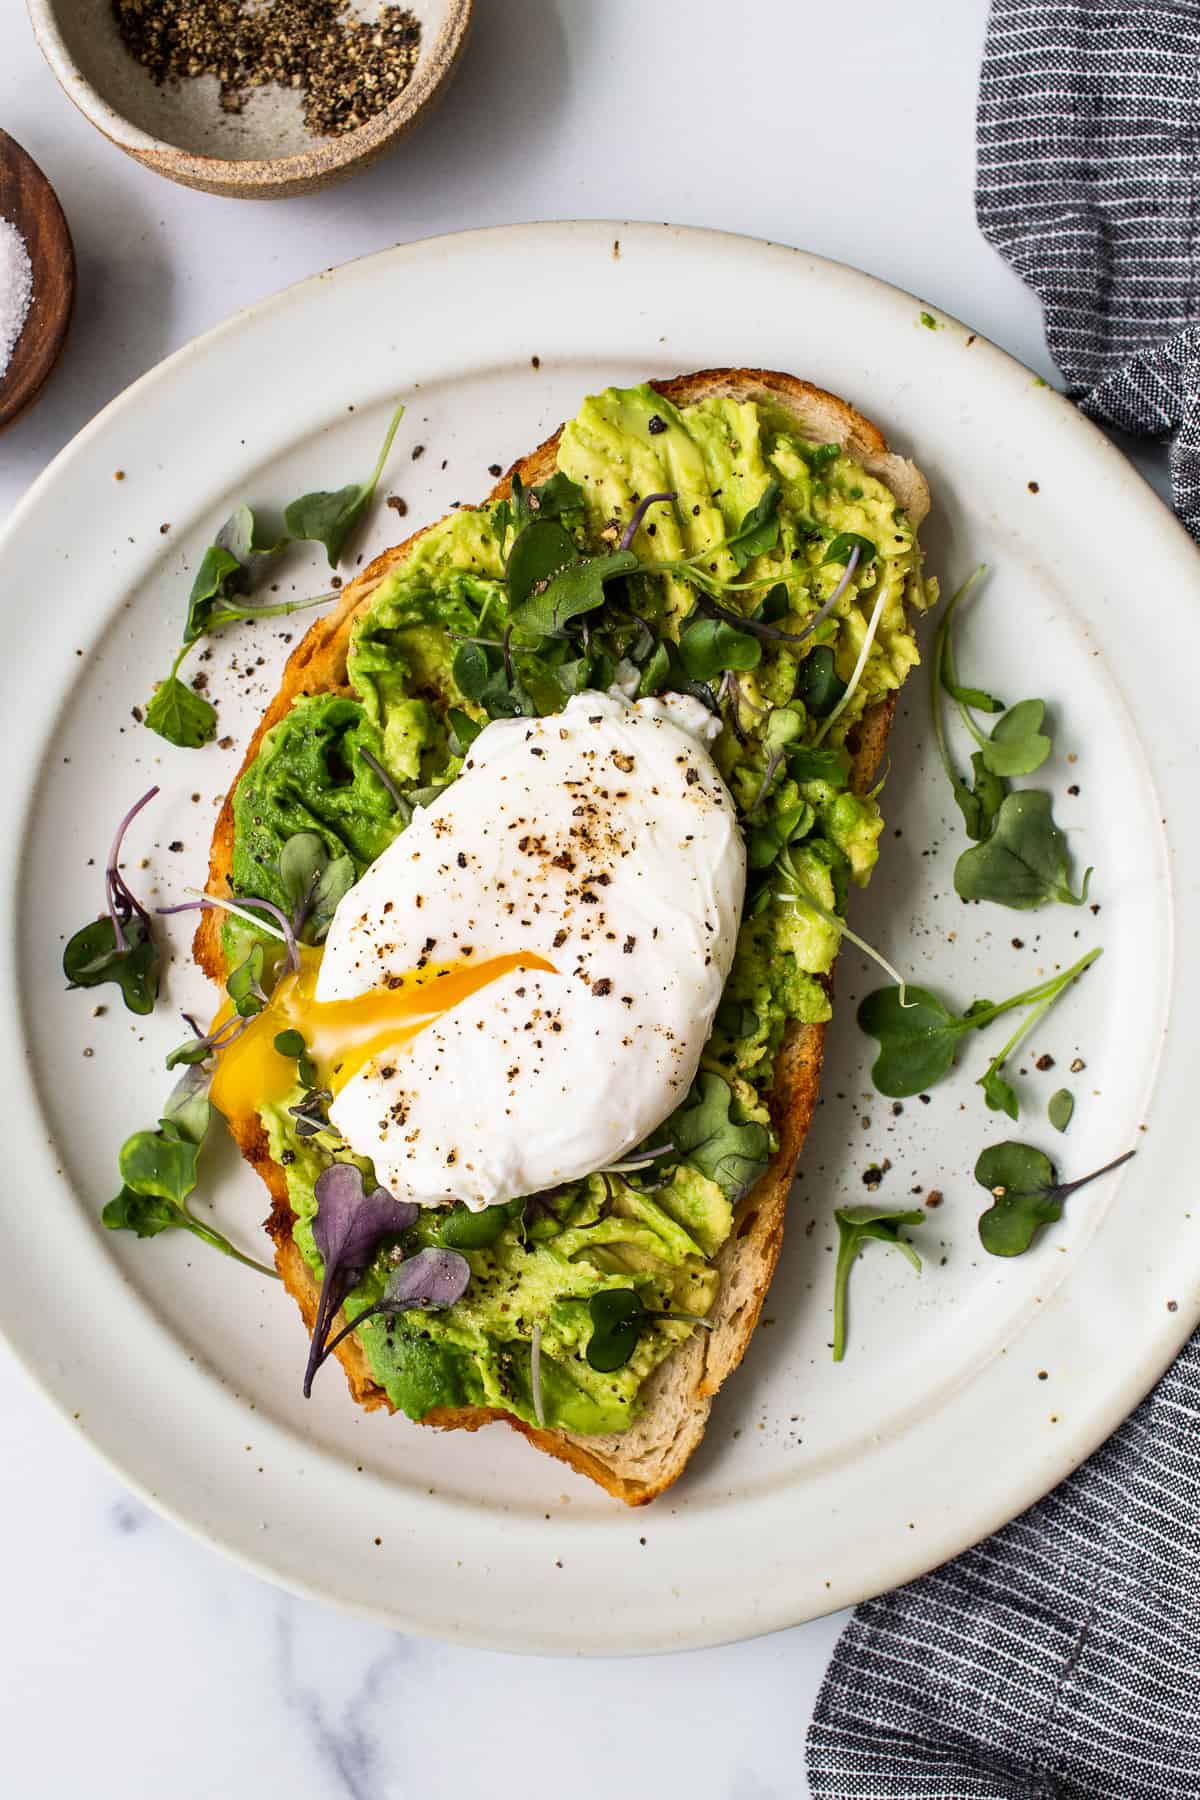 Poached egg on avocado toast on a plate with microgreens.